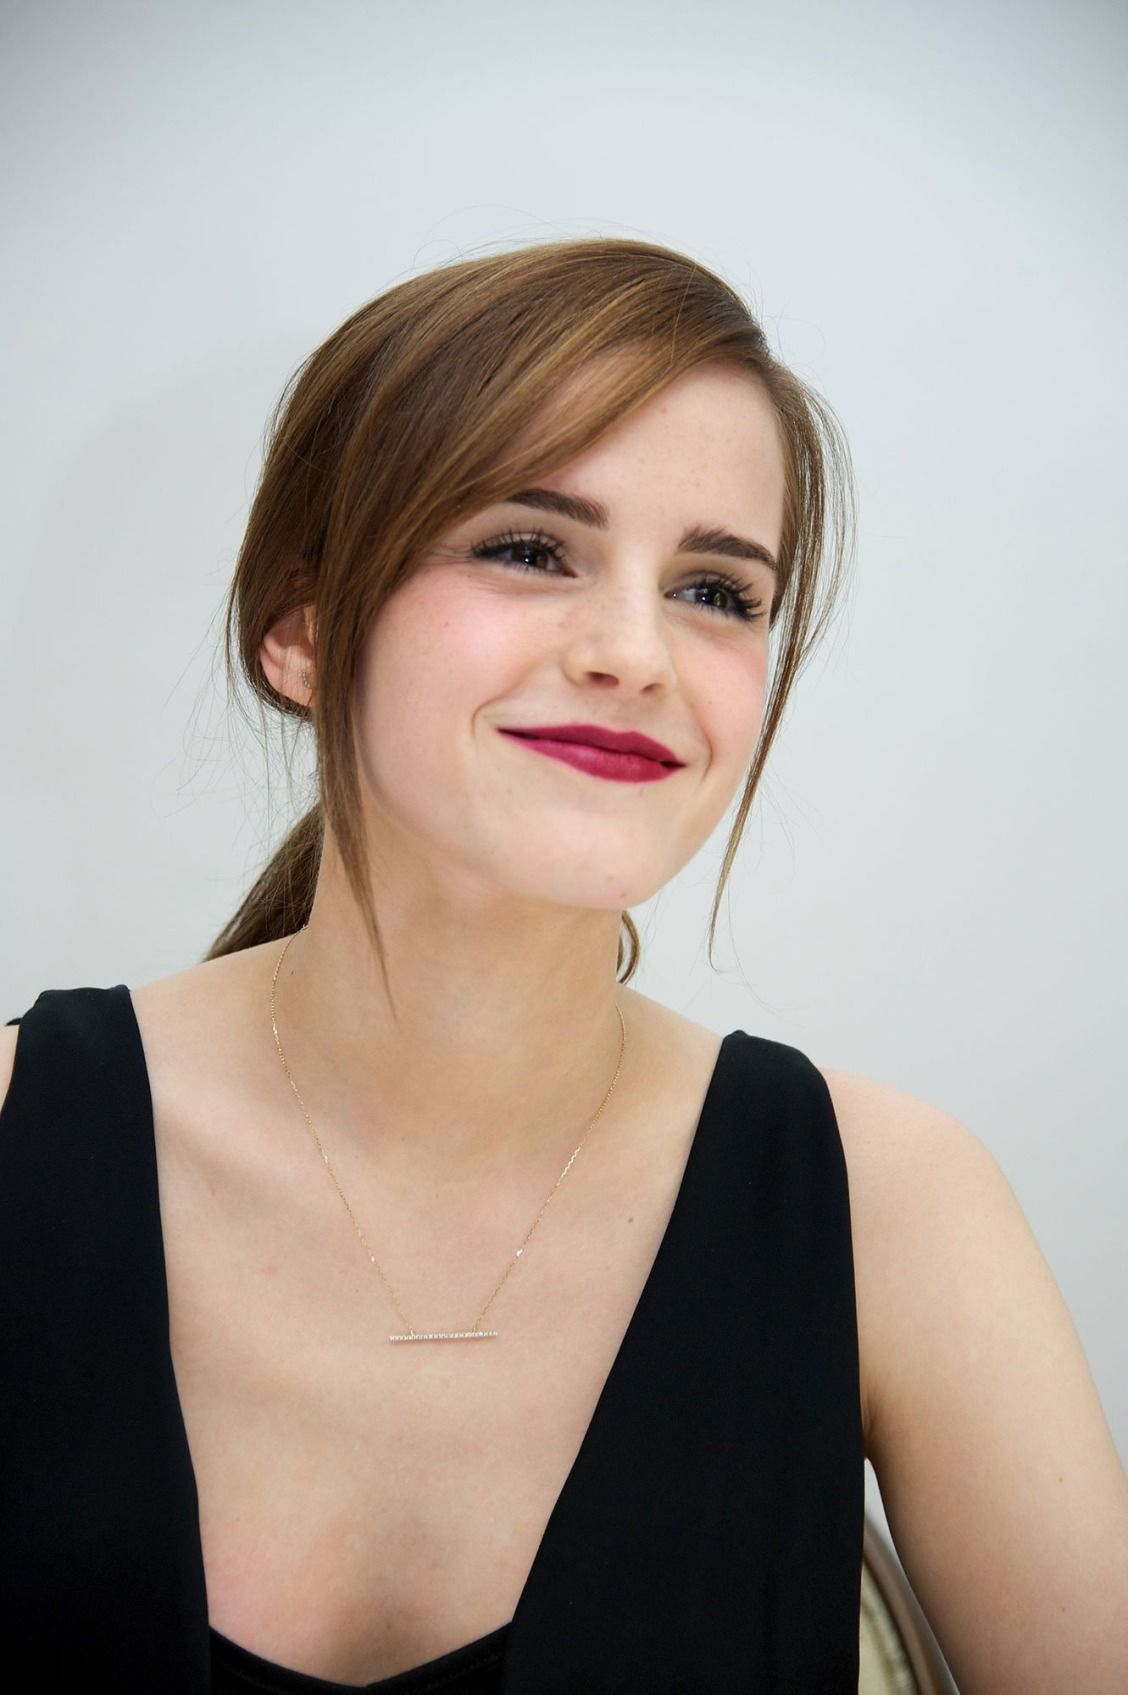 Emma Watson is revamping Beauty and the Beasts Belle into a feminist Disney Heroine.